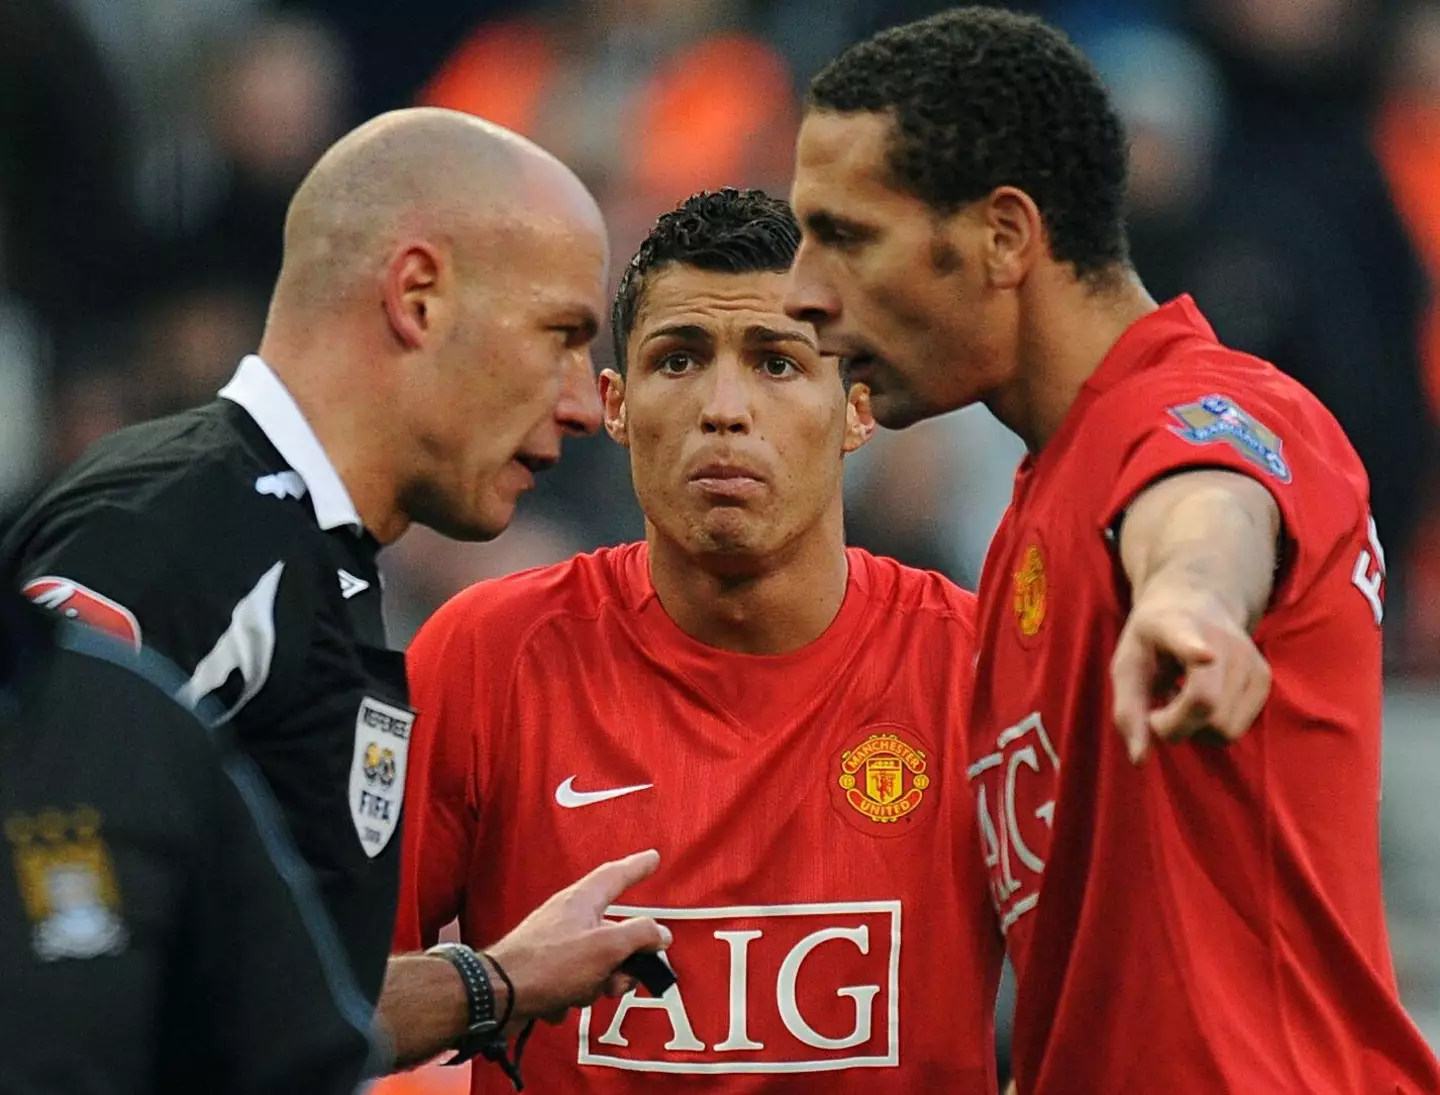 Manchester United's Cristiano Ronaldo and Rio Ferdinand argue with Howard Webb after Webb shows Ronaldo a red card. (Alamy)